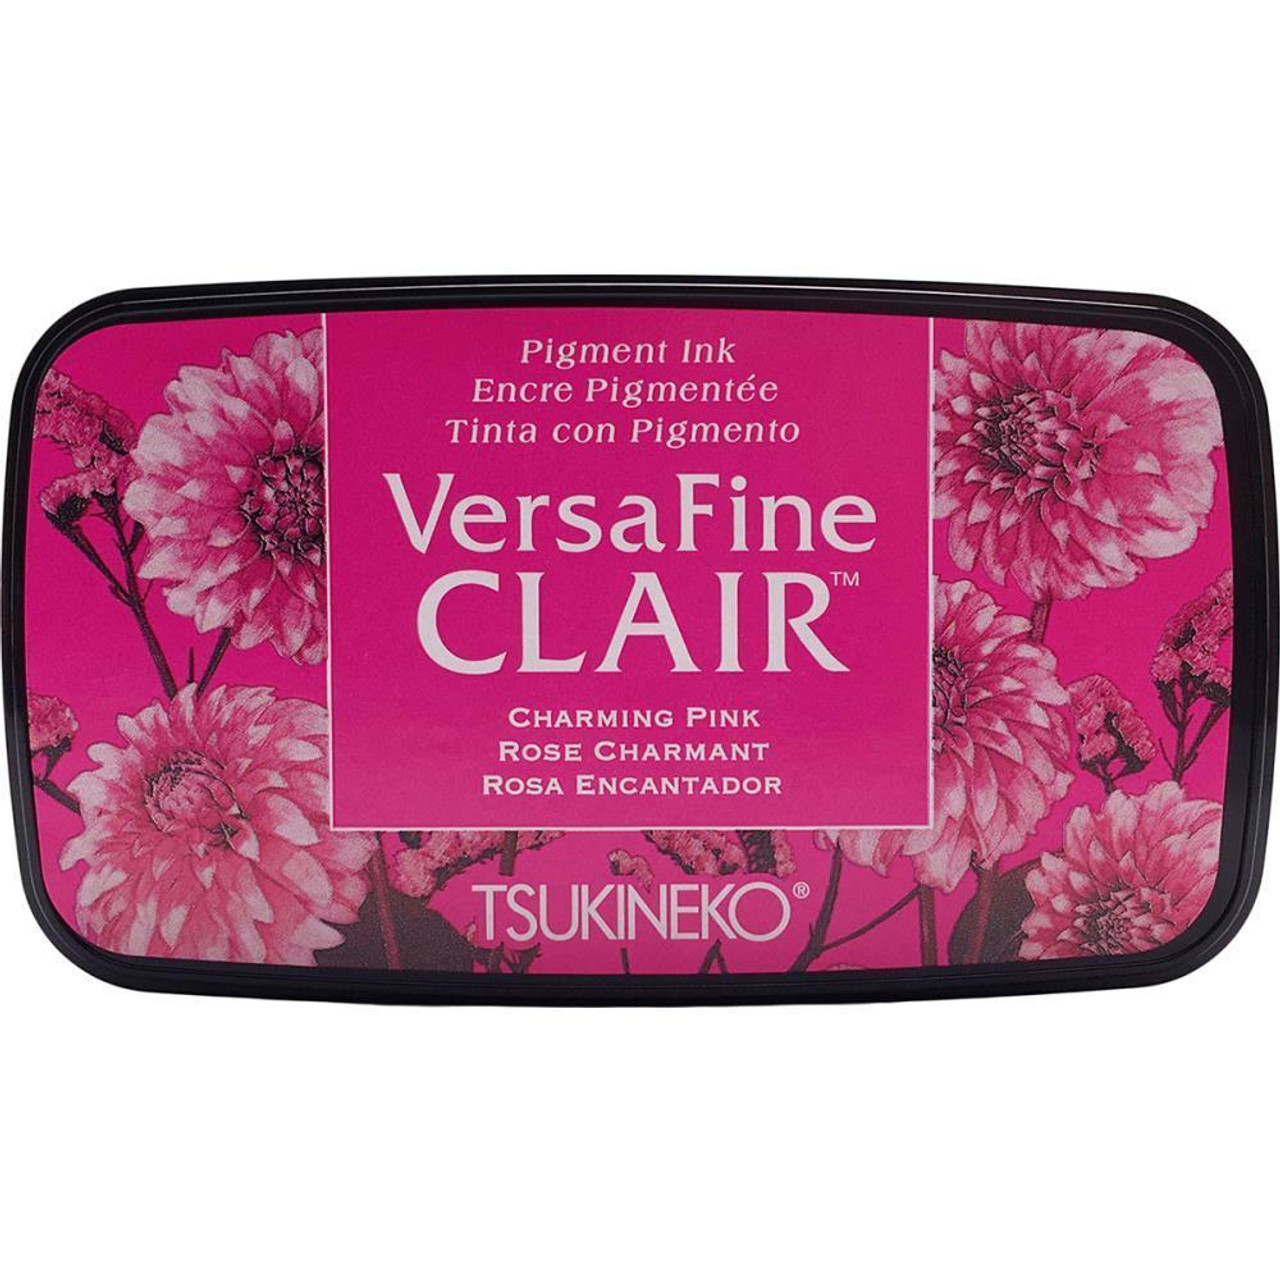 Product Release: VersaFine Clair Inkpads